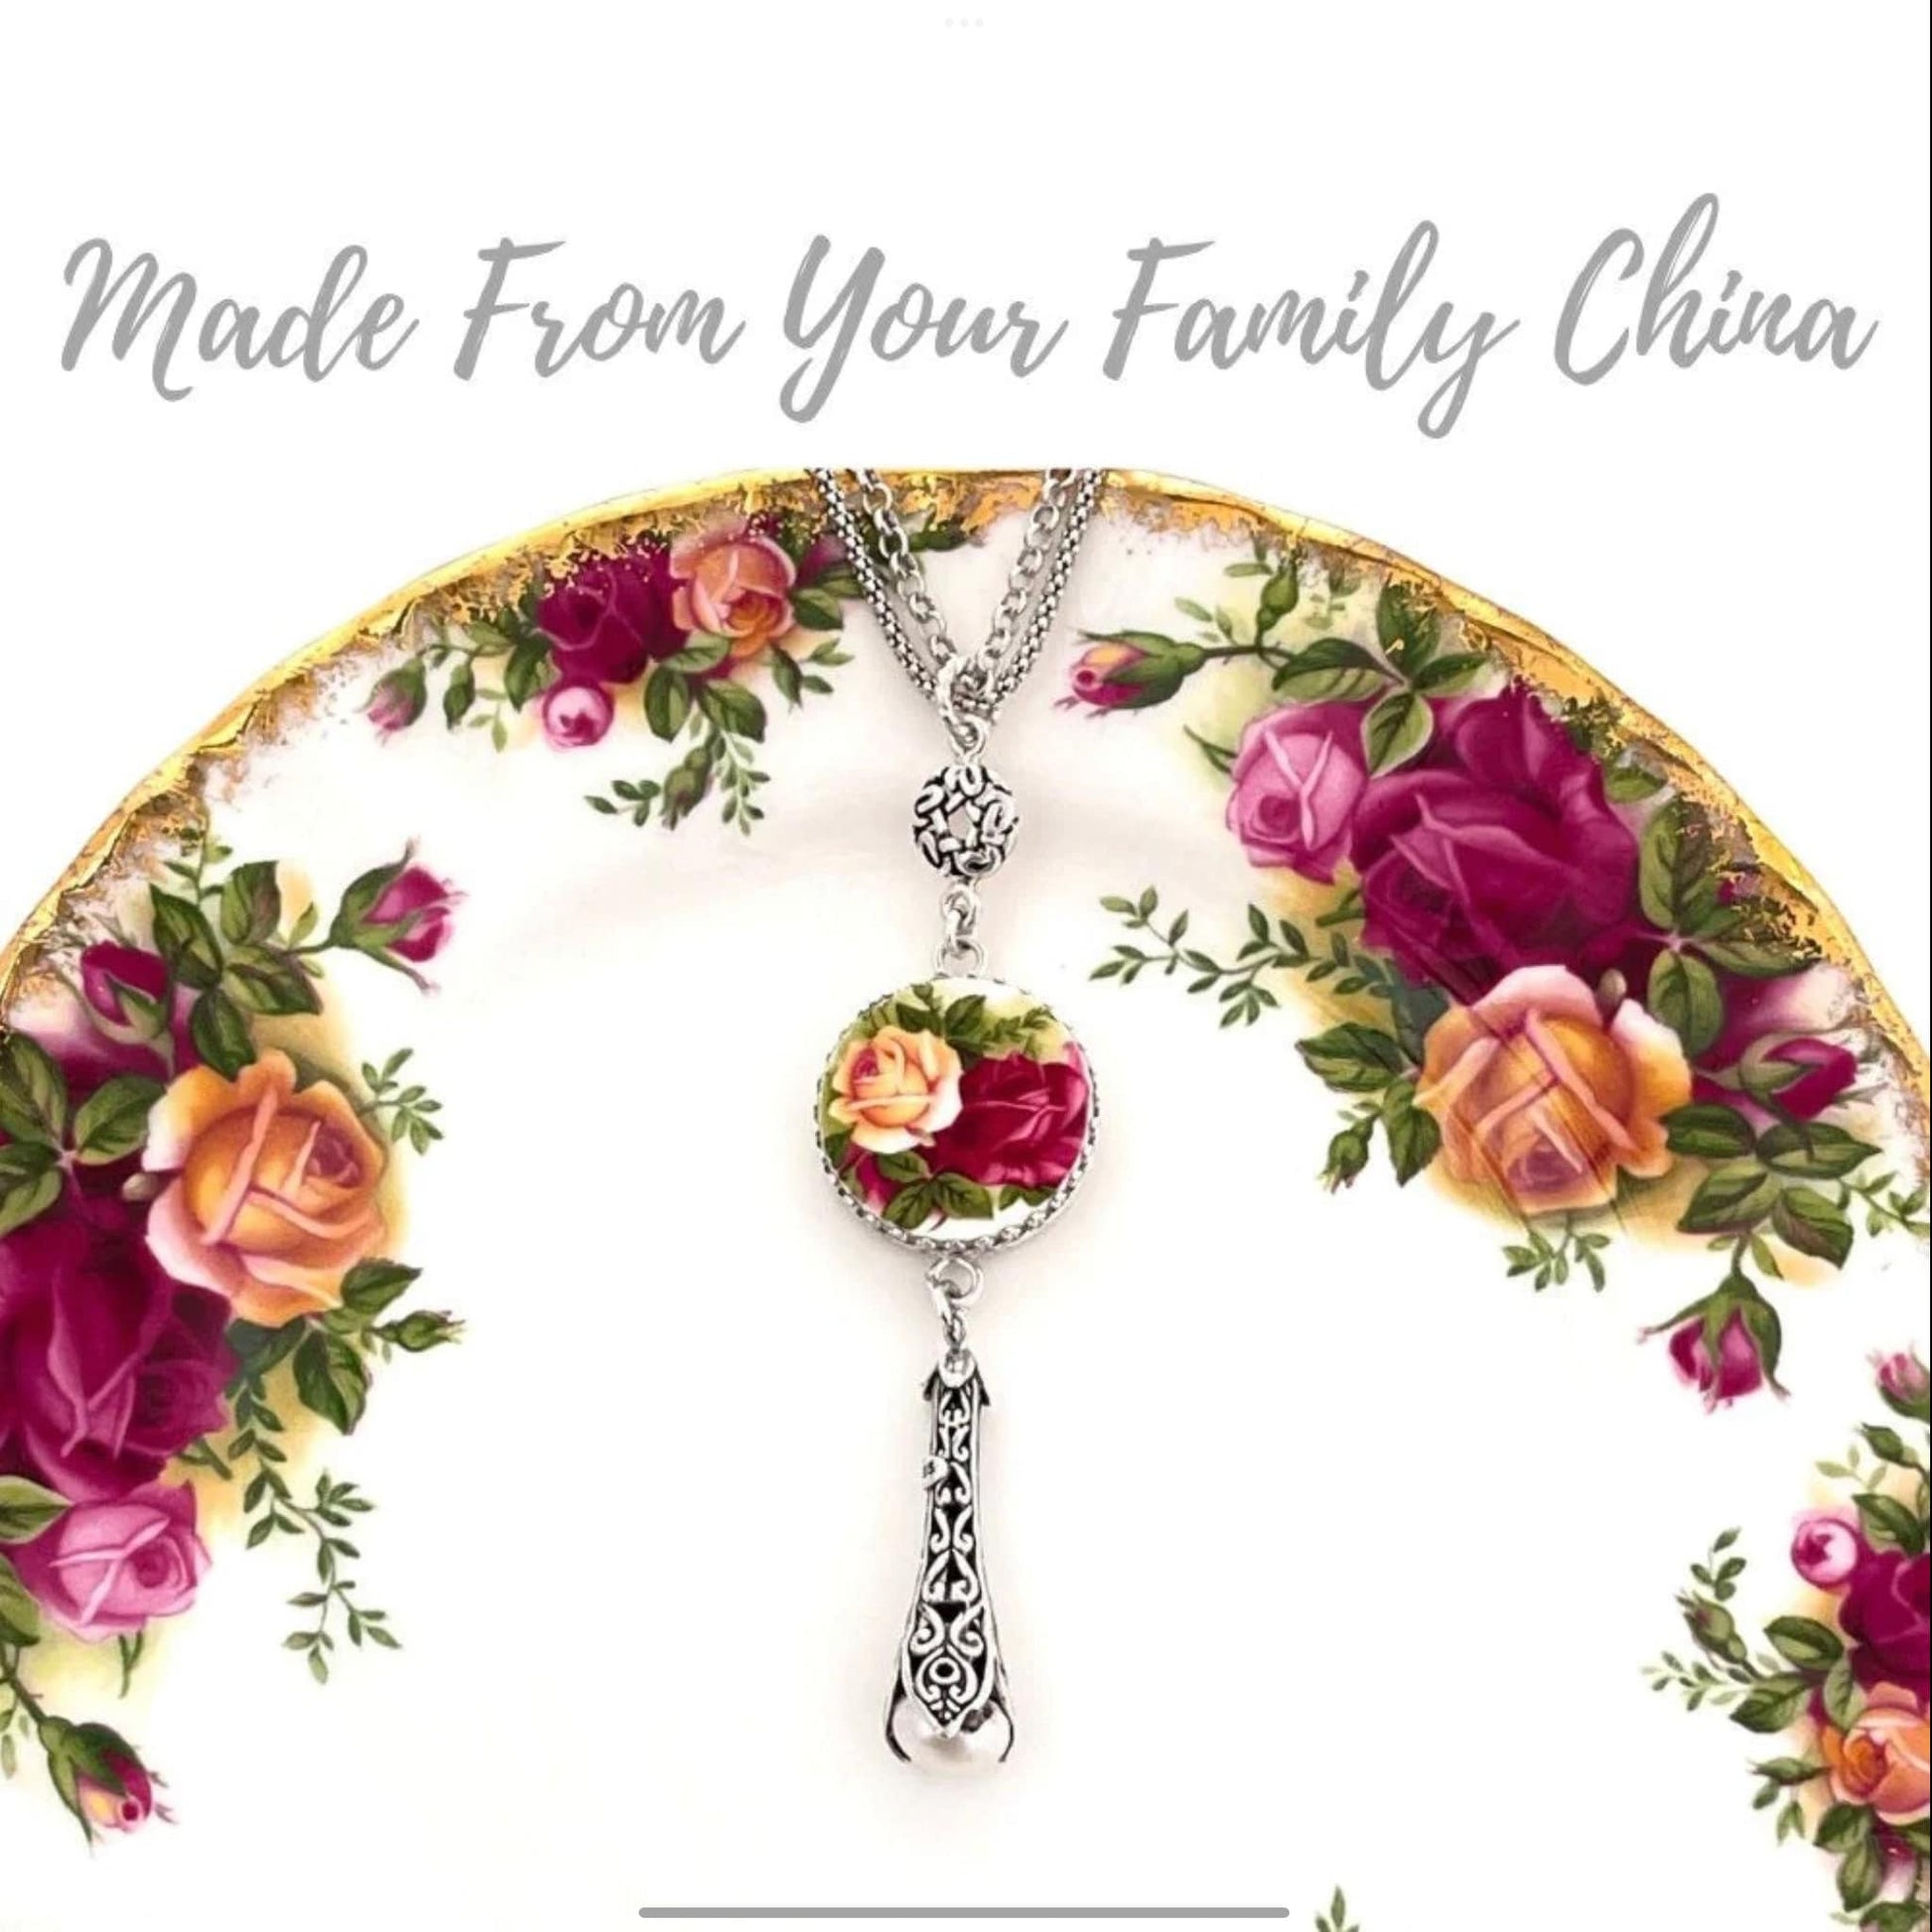 CUSTOM ORDER Pearl Drop Double Chain China Necklace, Custom Broken China Jewelry, Family Jewelry, Memorial Jewelry, Gifts for Women